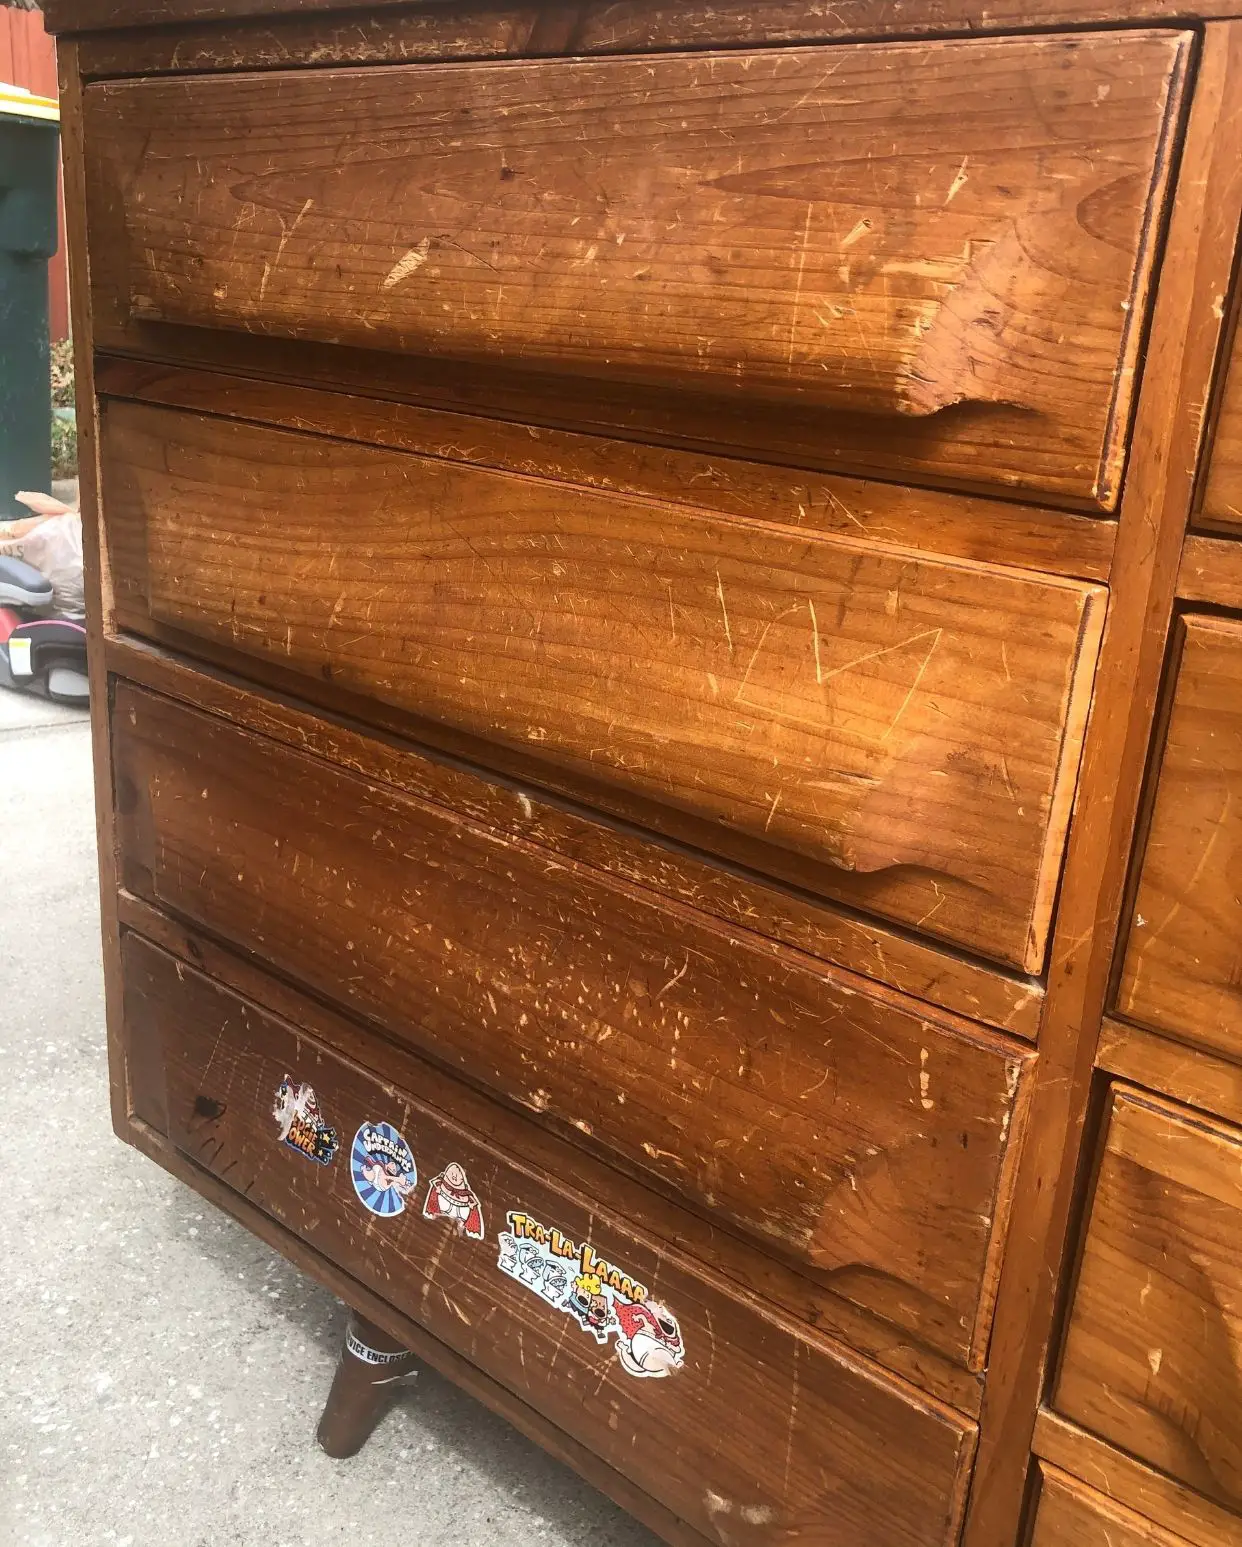 How I Gave This Neglected Pine Dresser a New Lease on Life